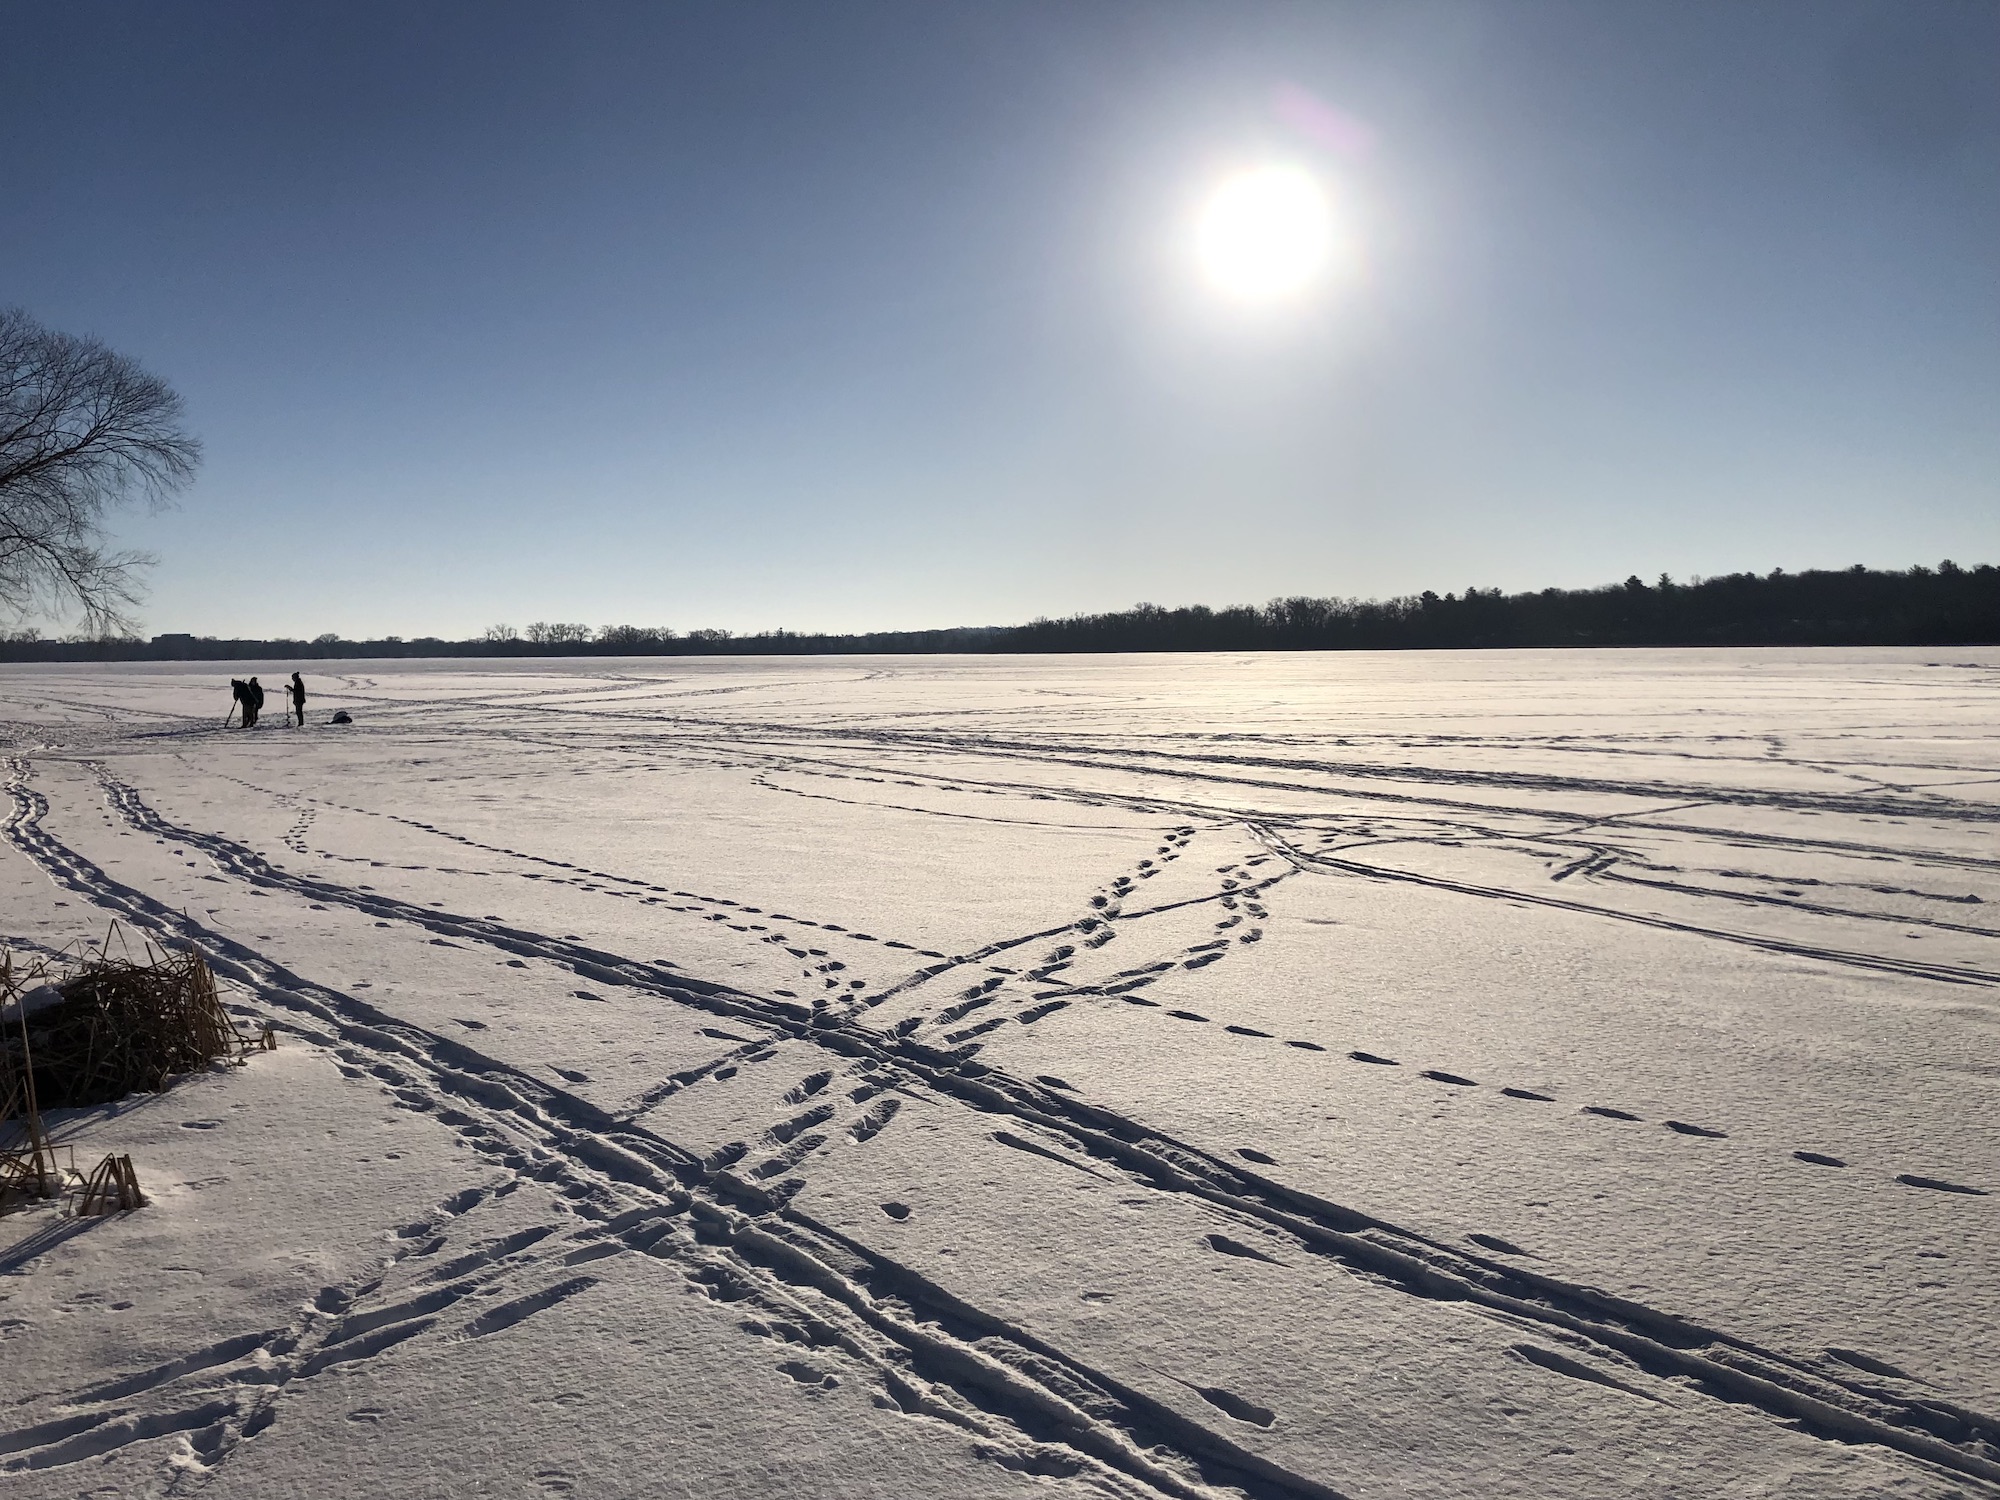 Lake Wingra on February 2, 2023. Groundhog Day.  Jimmy the Groundhog saw his shadow.  6 more weeks of Winter. Lake plungers digging hole in Lake Wingra ice to jump in.